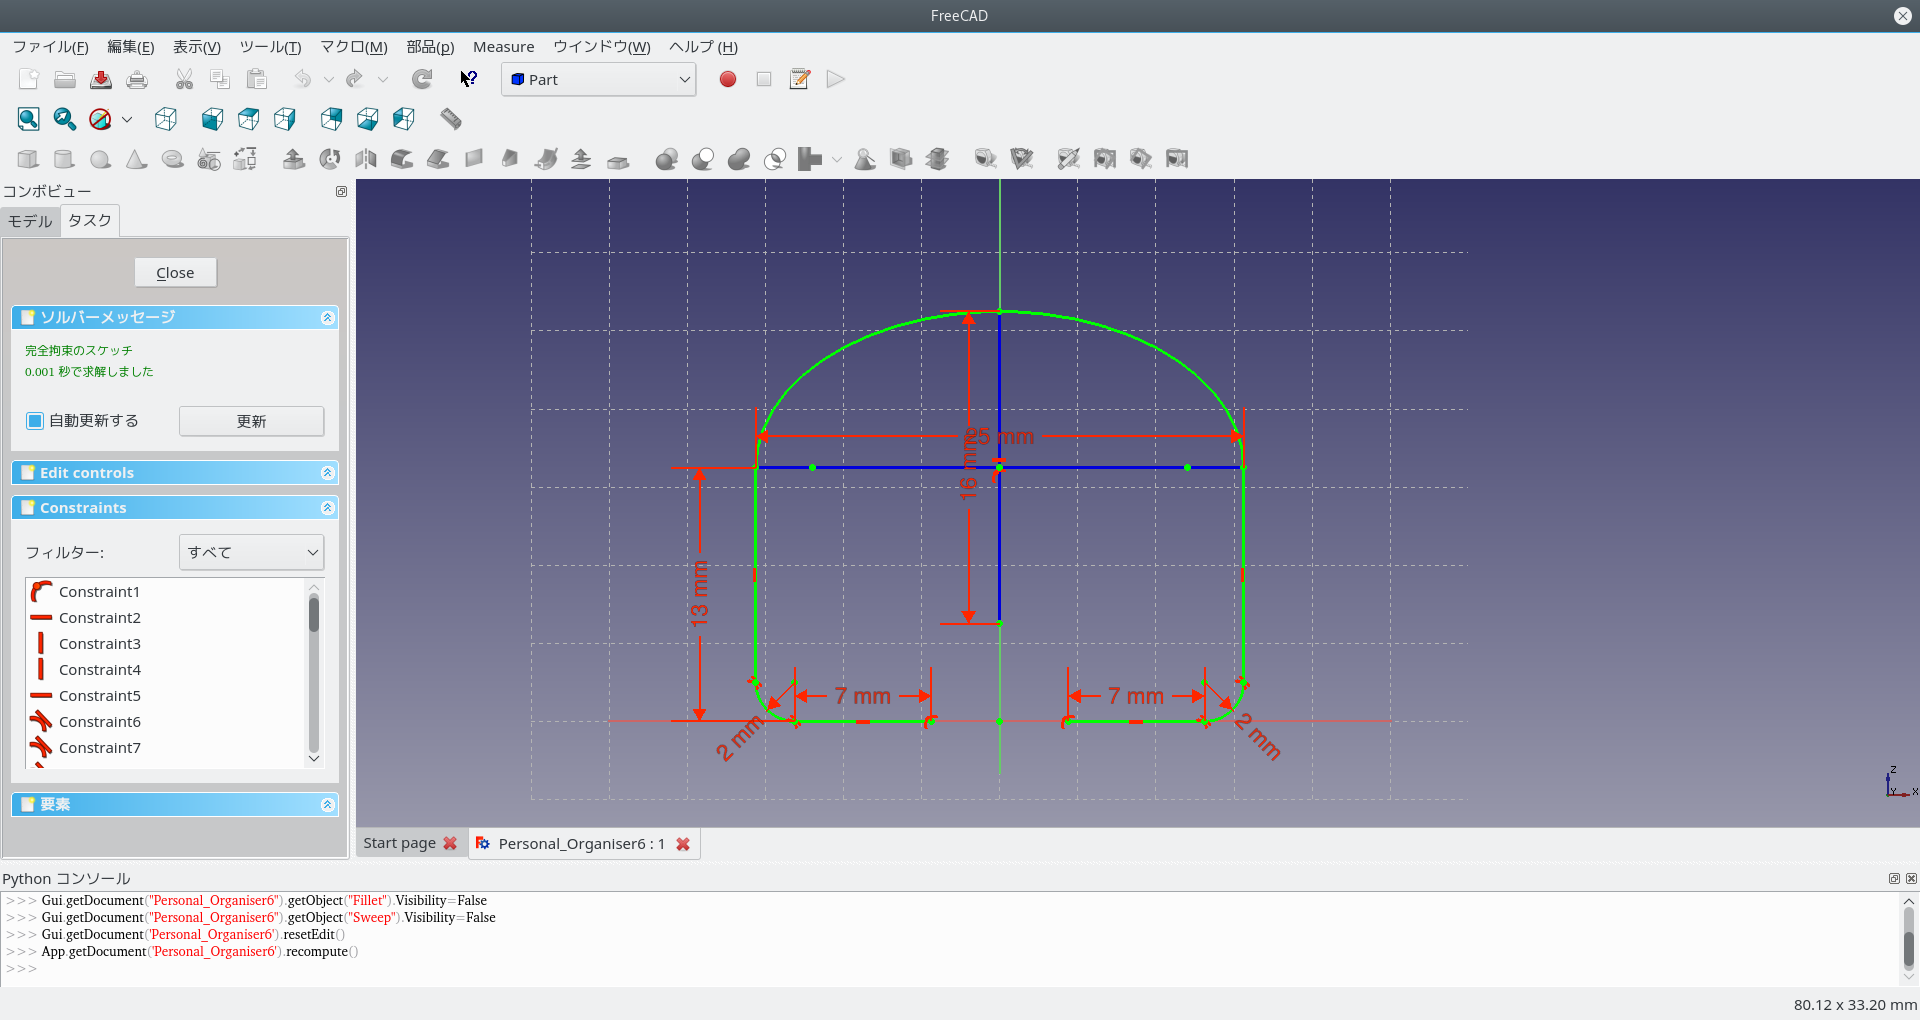 FreeCAD_Personal_Organiser6_02.png